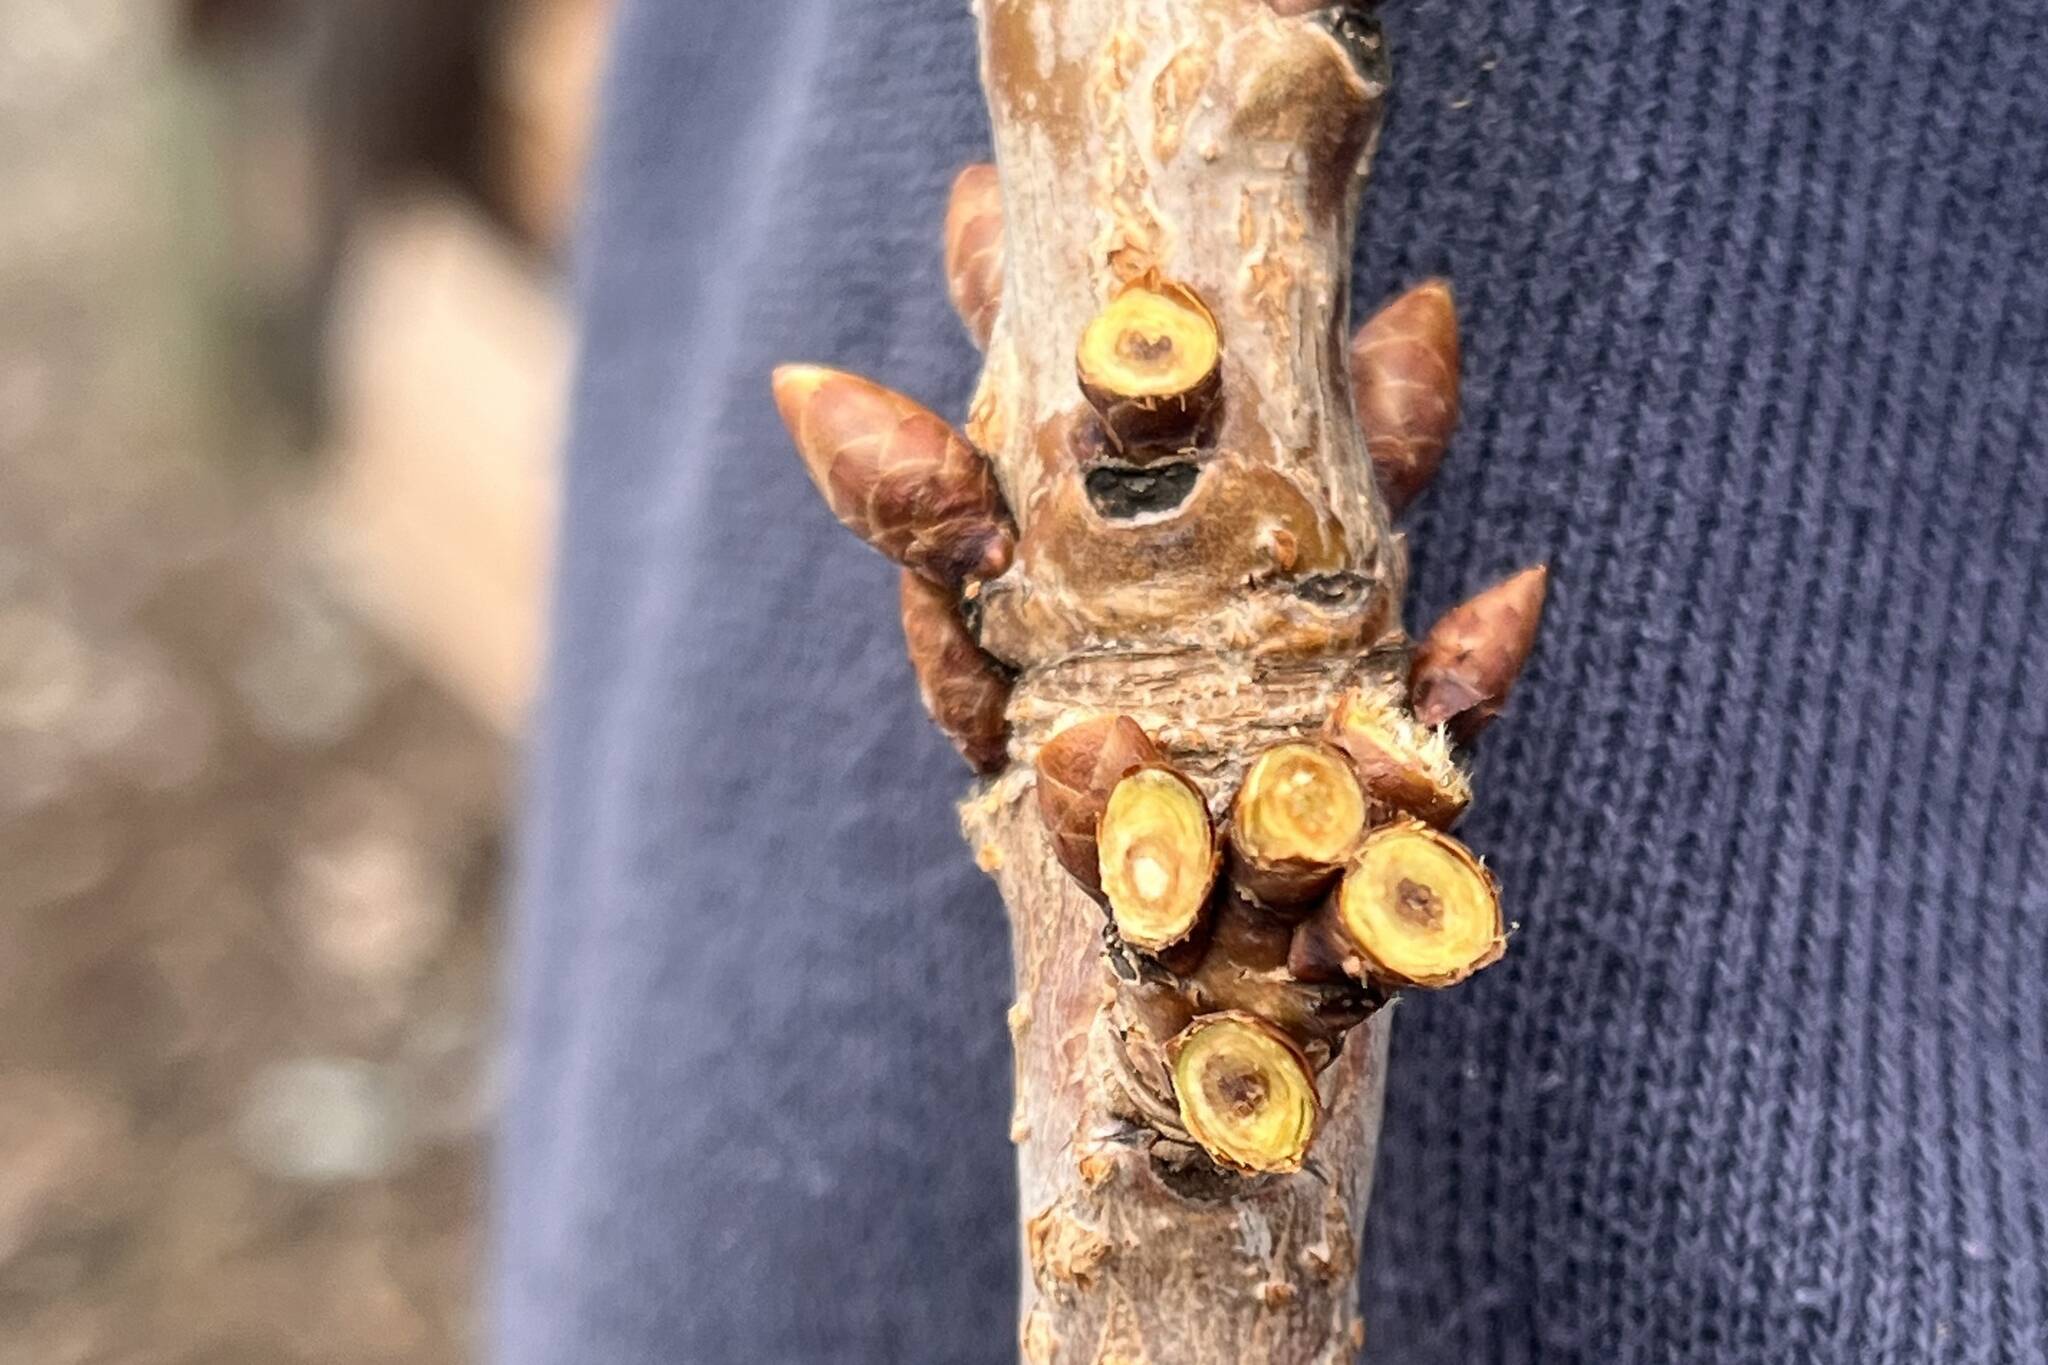 Damaged brown buds from the limb of a tree, seen during the inspection at Wloka Farms (Photo by Molly Thurston)